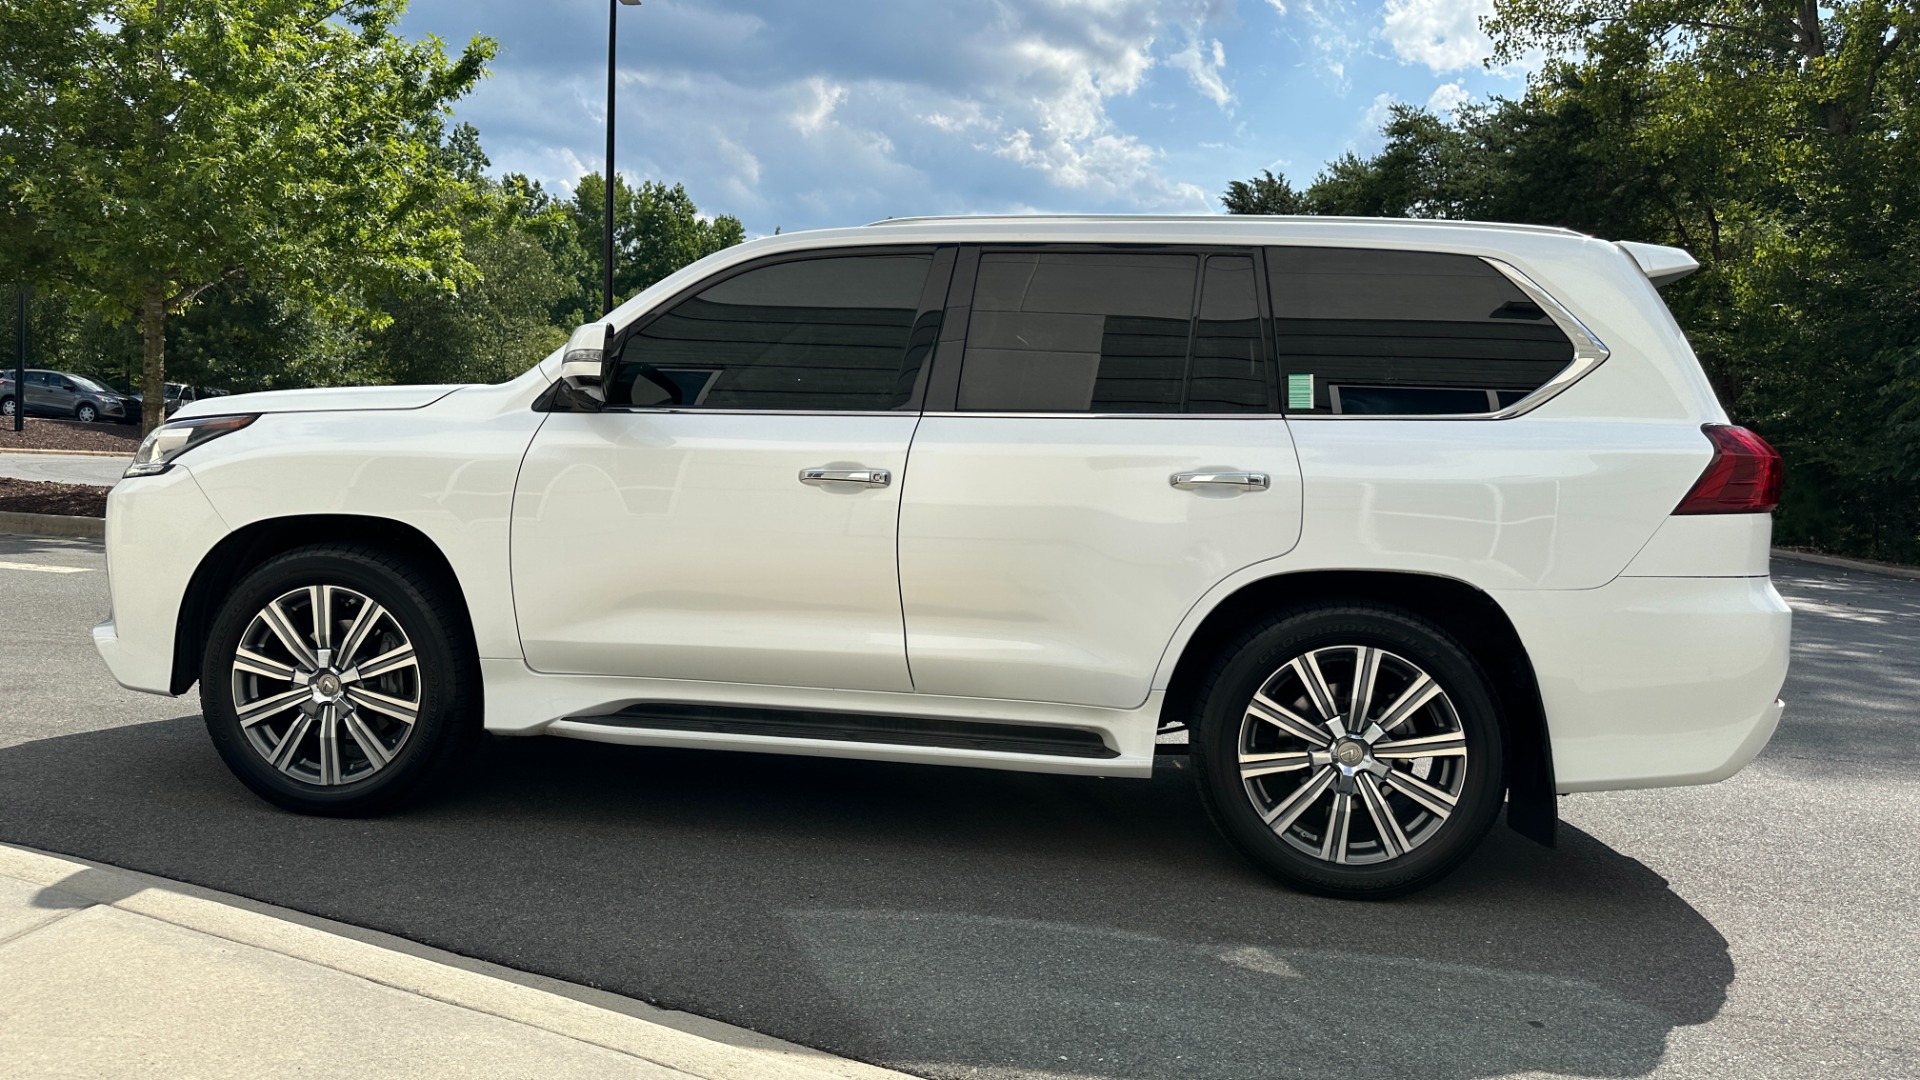 Used 2017 Lexus LX LX 570 LUXURY / MARK LEVINSON / REAR DVD SCREENS / 3 ROW / 4WD for sale $46,995 at Formula Imports in Charlotte NC 28227 6